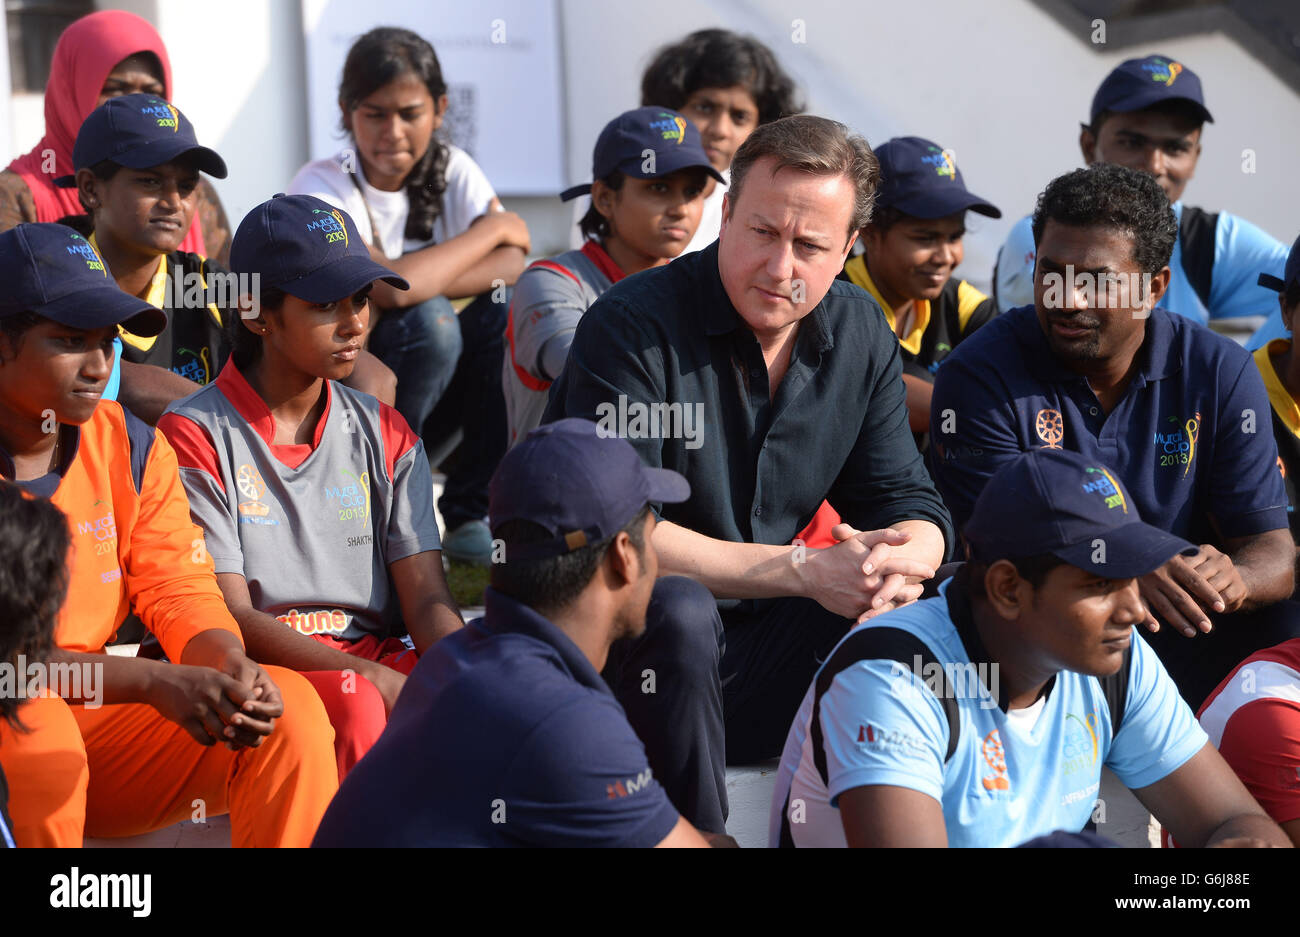 Prime Minister David Cameron visits Colombo's National Cricket Academy where former Sri Lankan cricketer Muttiah Muralitharan runs a charity bringing young people from both sides of the Sri Lankan communities together by playing cricket, the Prime Minister is visiting Sri Lanka to attend the Commonwealth Heads of Government Meeting. Stock Photo